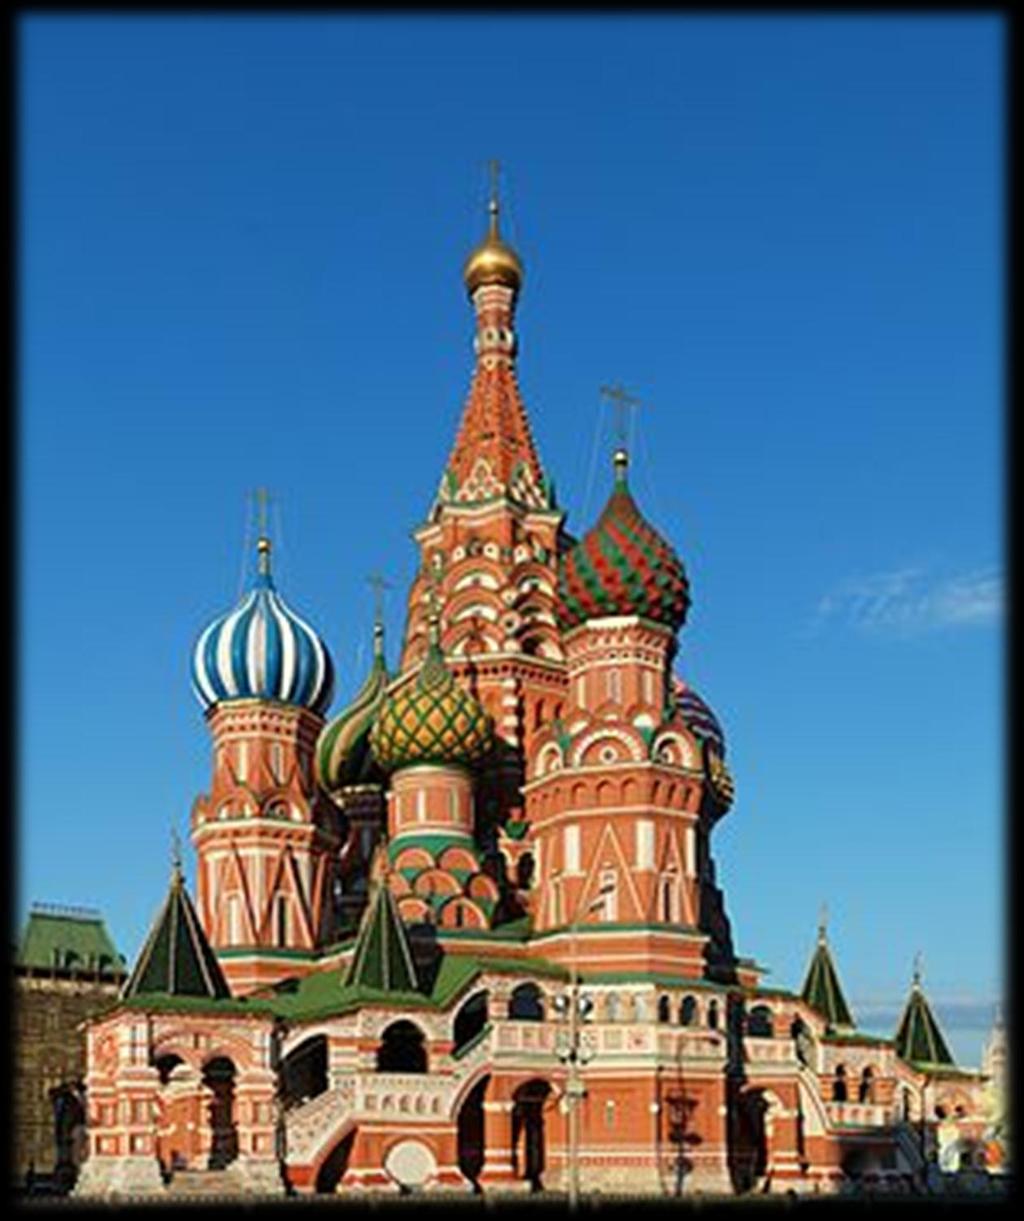 St. Basil s Cathedral: Ivan IV ordered the construction of the church to commemorate